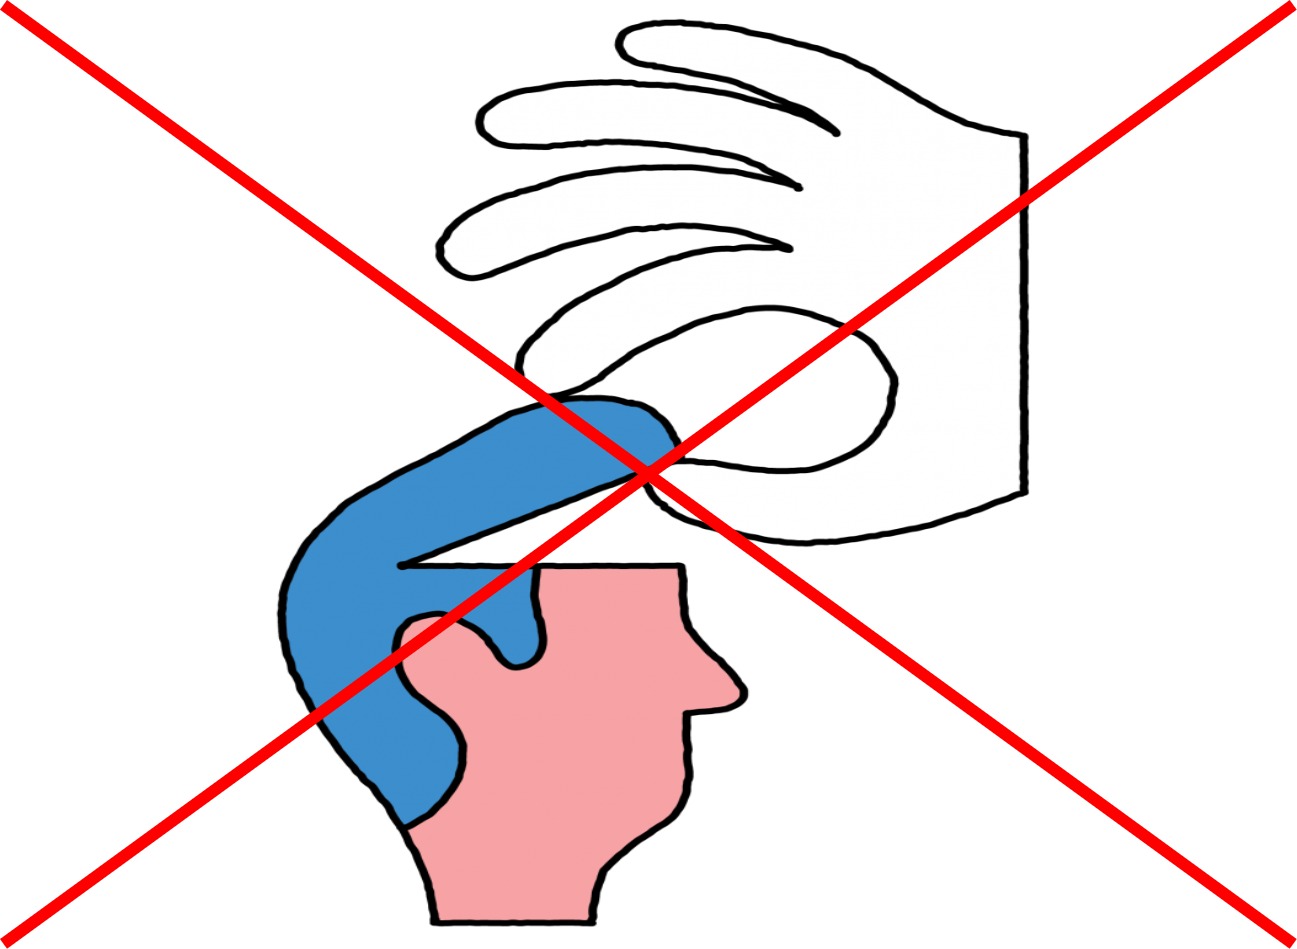 Illustration from Mariana’s article showing a person’s head being opened up with a hand. My version has it crossed out in red.